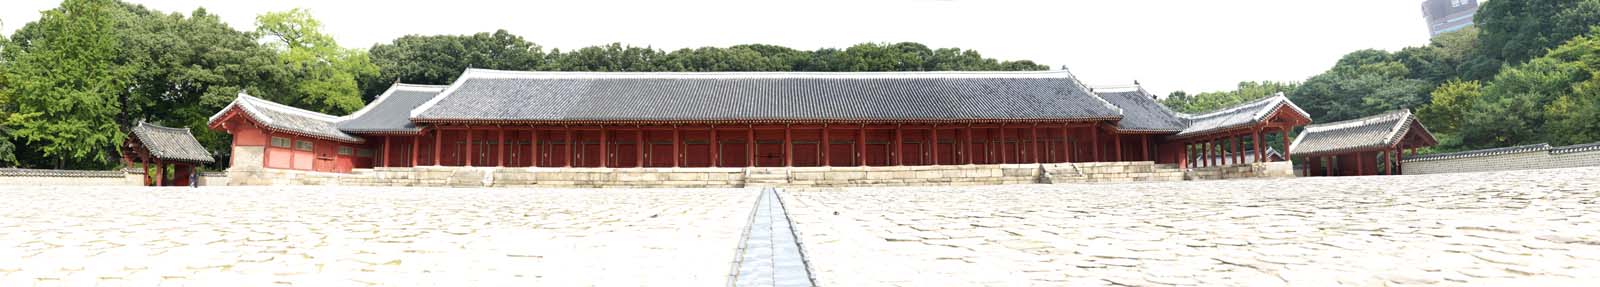 photo,material,free,landscape,picture,stock photo,Creative Commons,Tadashi of the ancestral mausoleum of the Imperial Family, Jongmyo Shrine, Religious service, First Emperor, the Imperial Ancestral Temple 